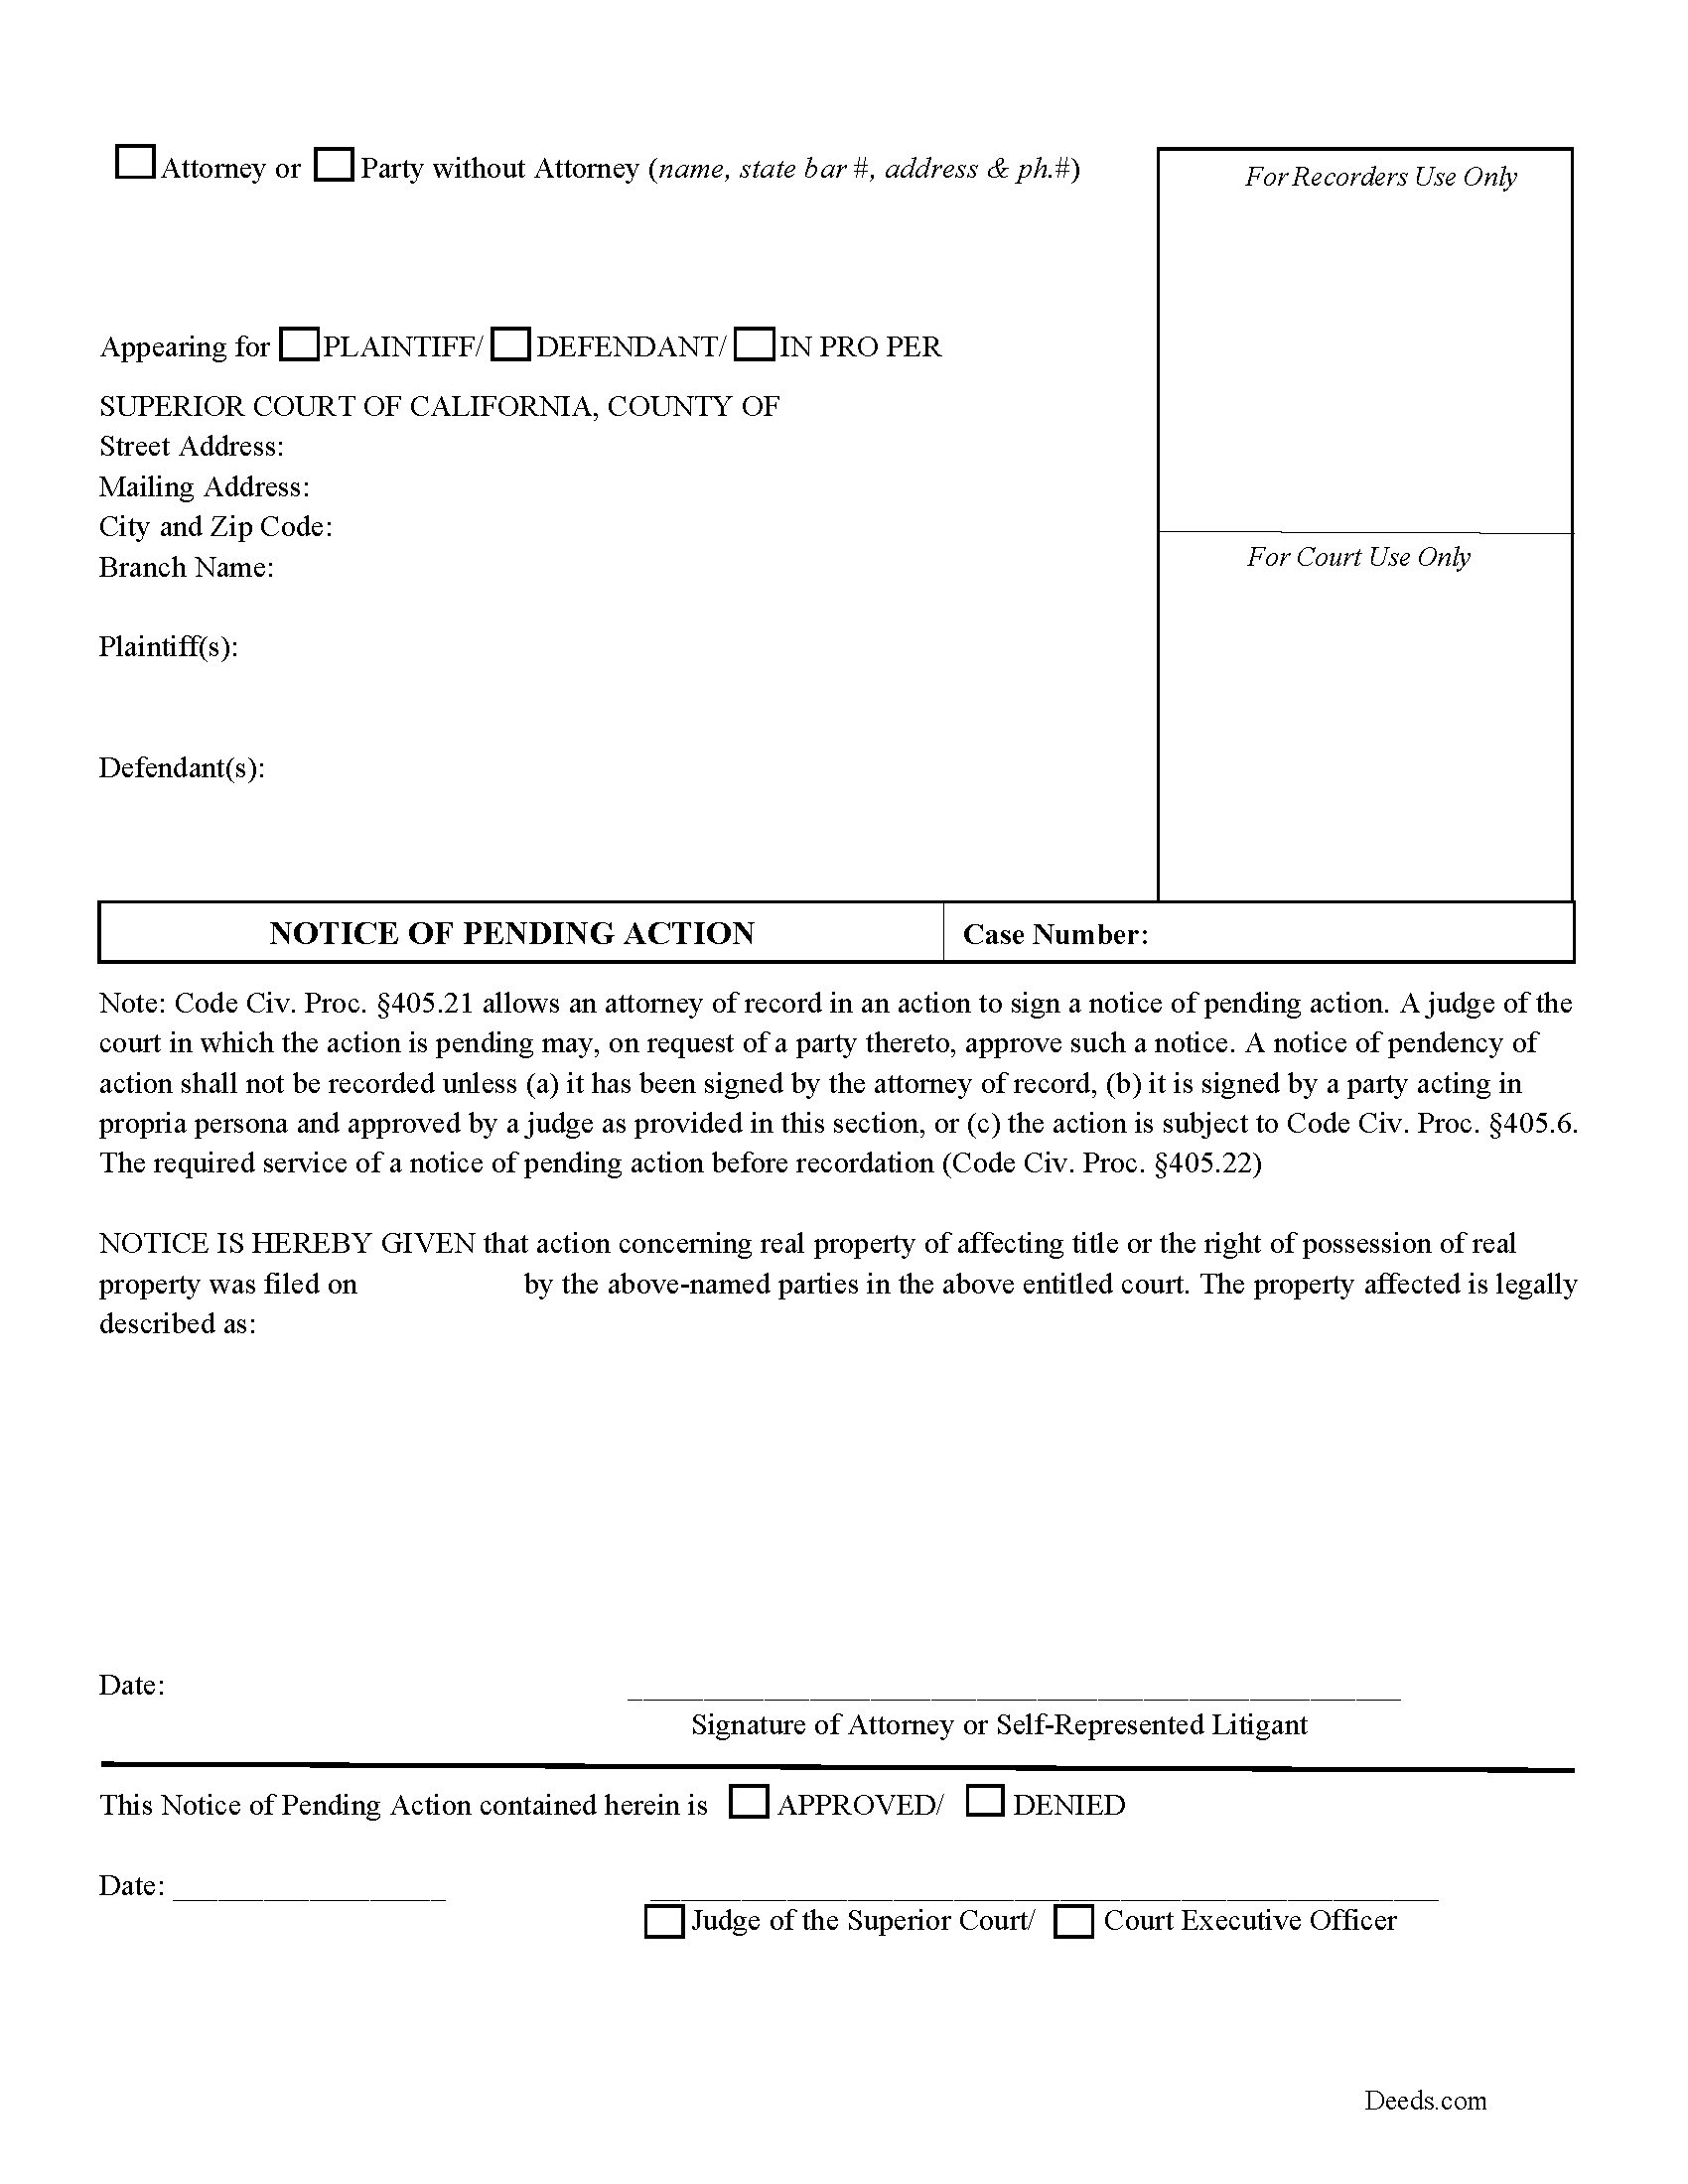 California Notice of Pending Action Image